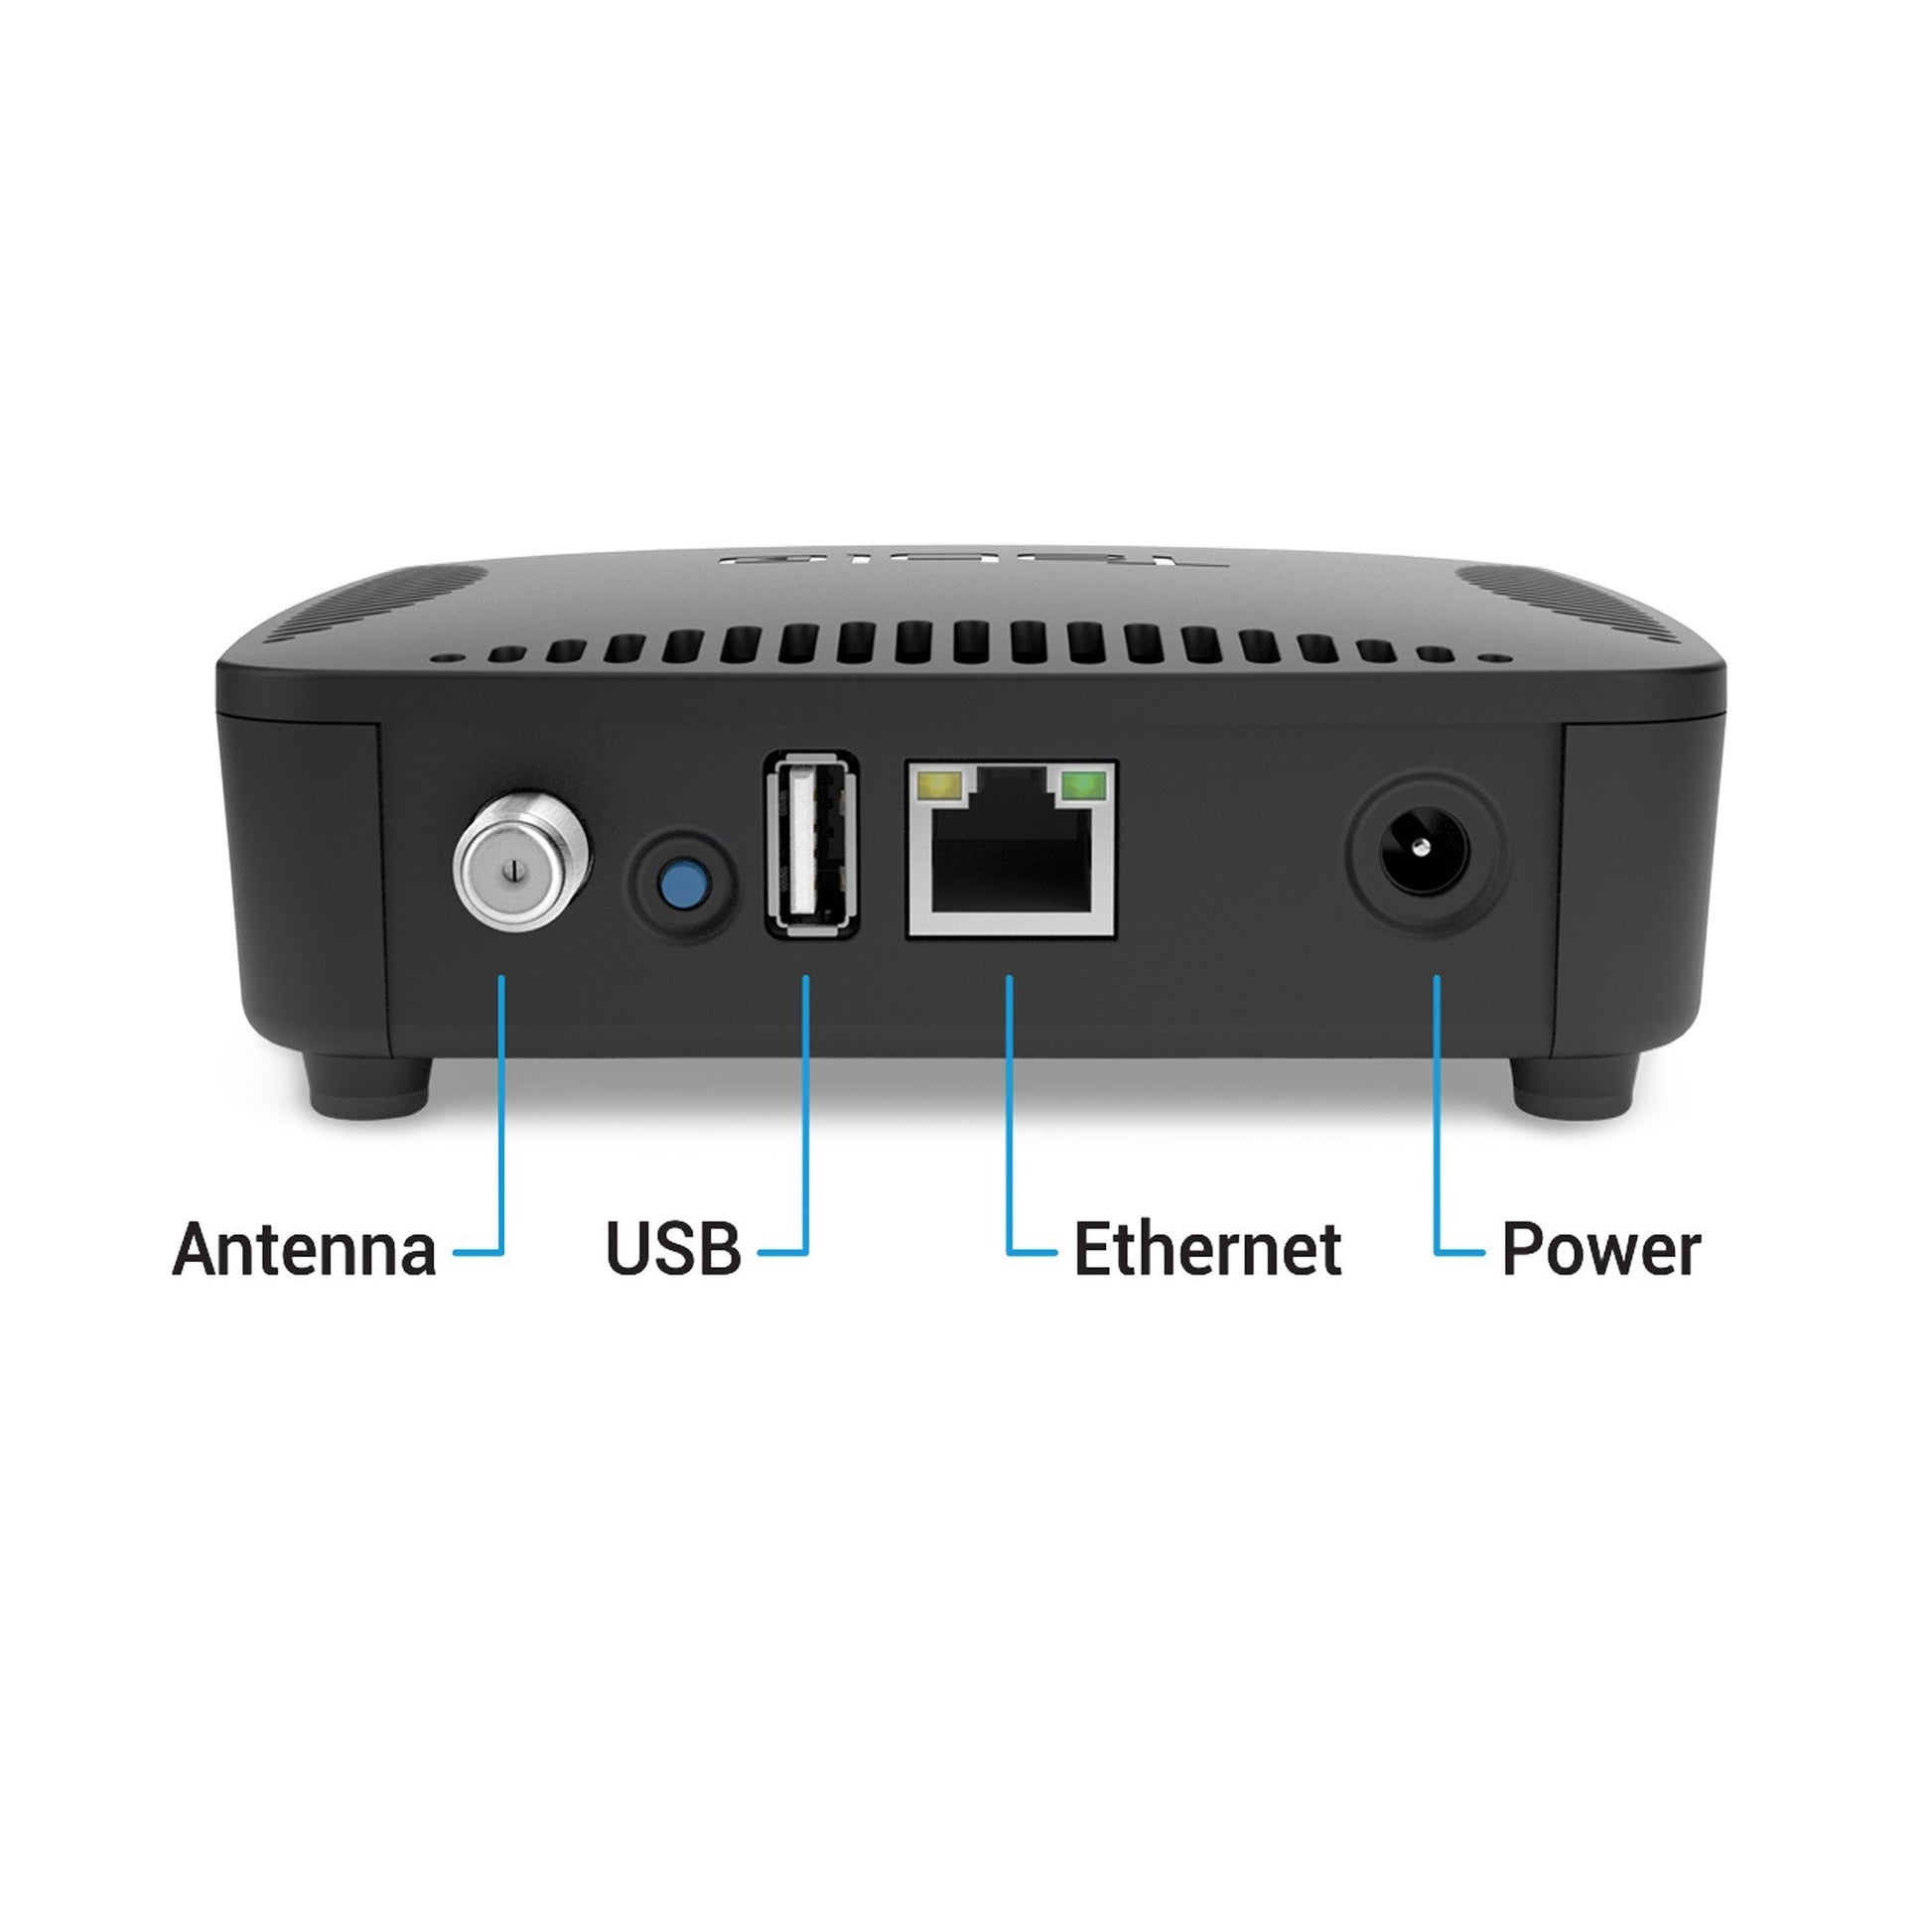 Tablo DUAL LITE Over-The-Air (OTA) DVR (Digital Video Recorder) for Cord Cutters. DVR hardware, rear view with inputs labelled.